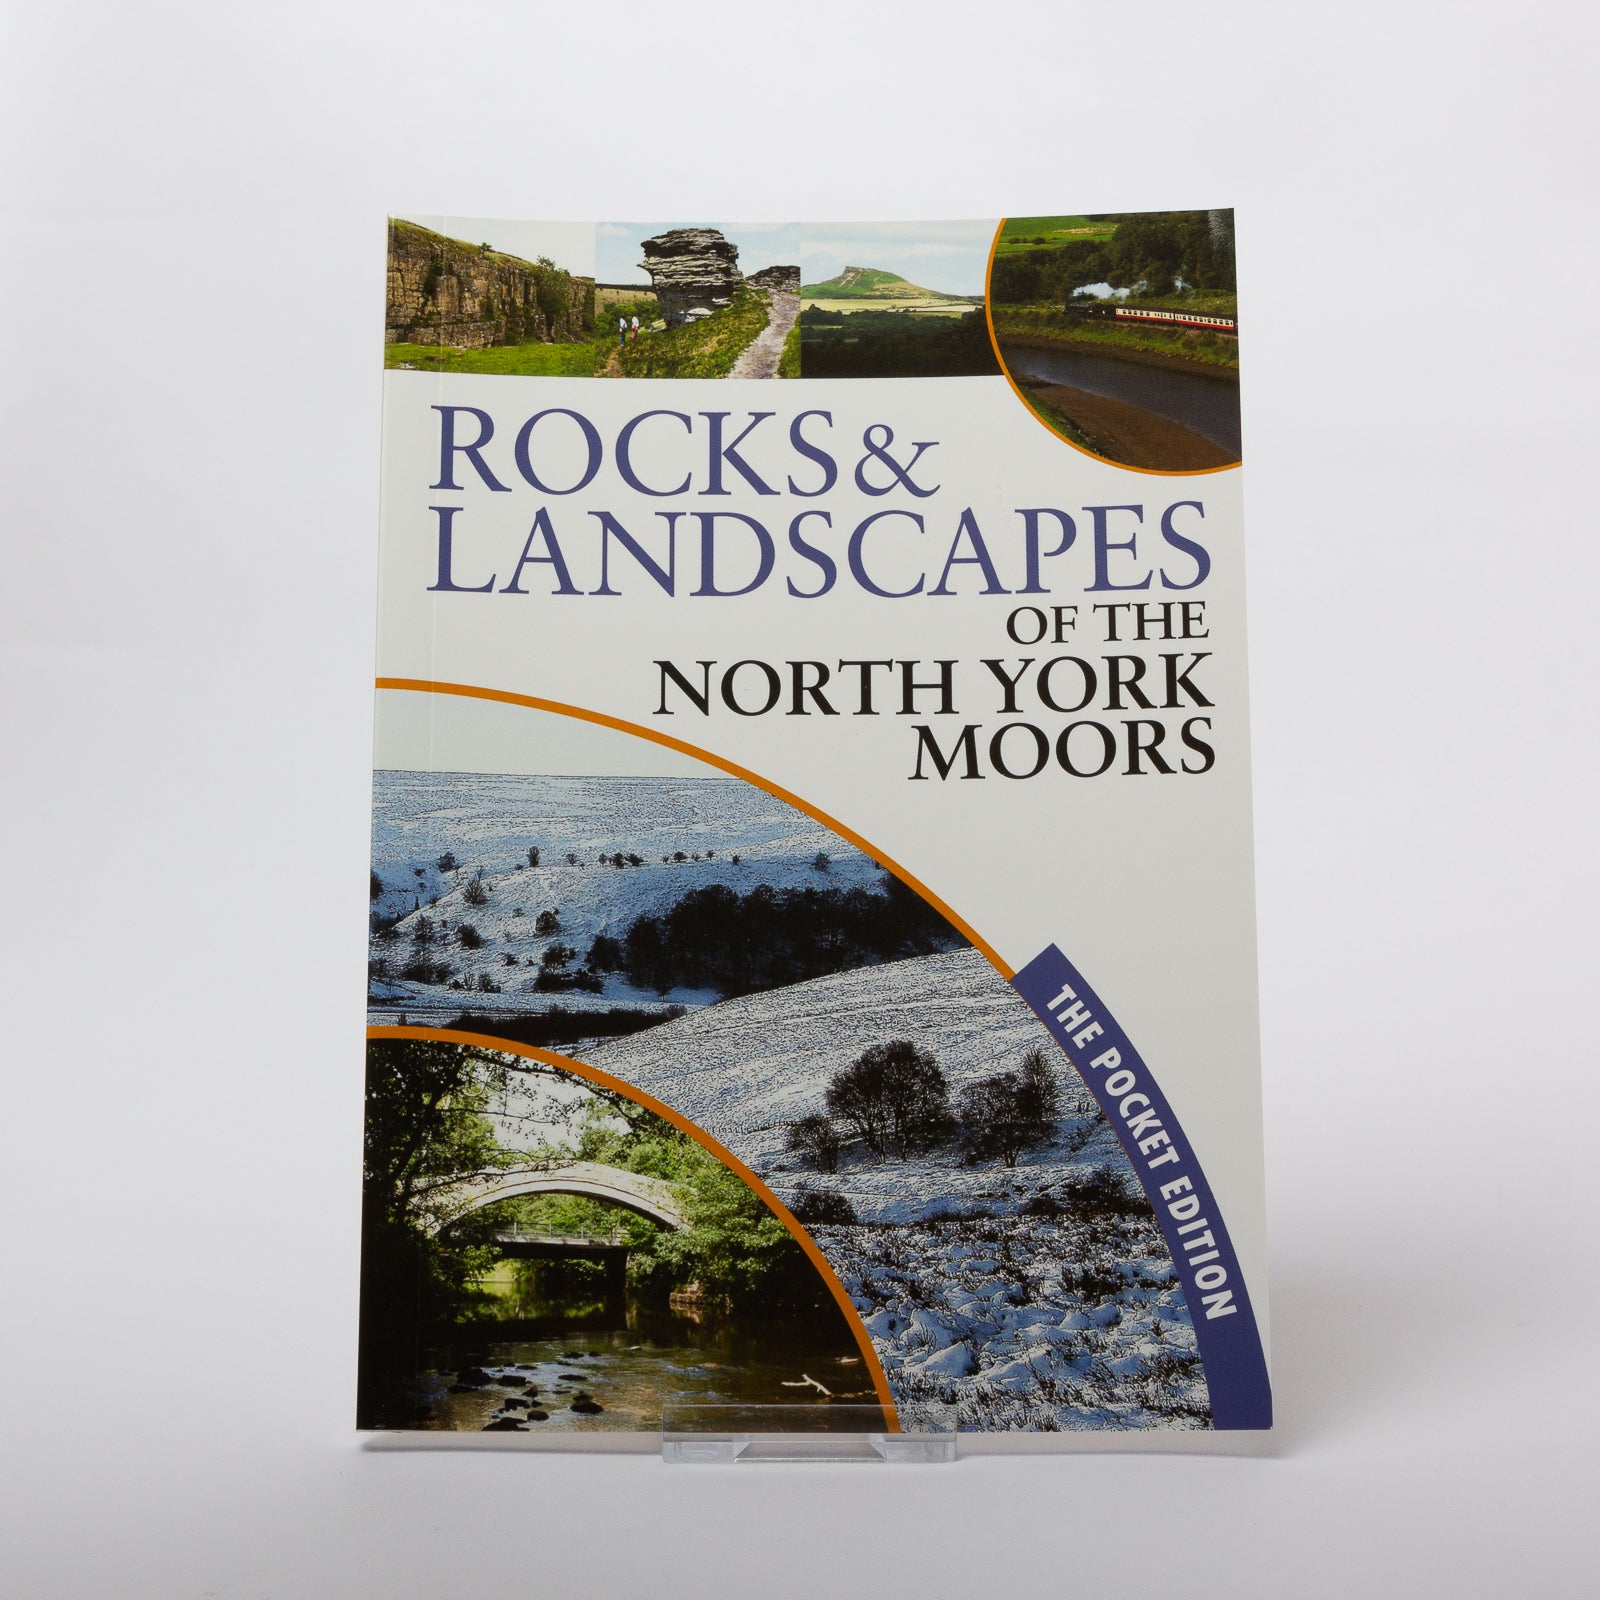 Rocks & Landscapes of the North York Moors